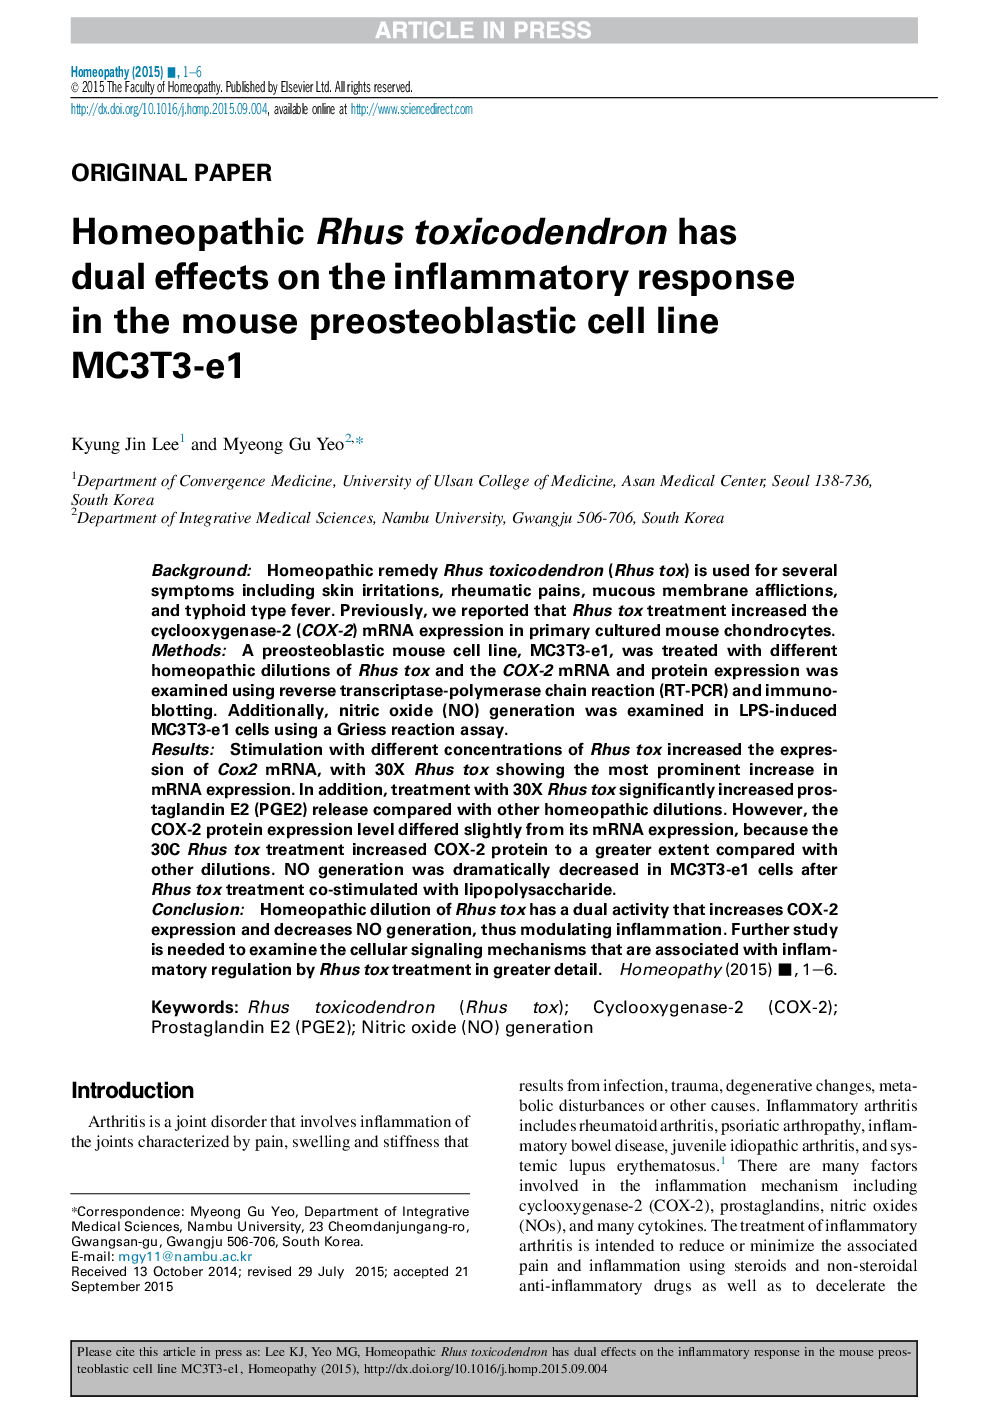 Homeopathic Rhus toxicodendron has dual effects on the inflammatory response in the mouse preosteoblastic cell line MC3T3-e1